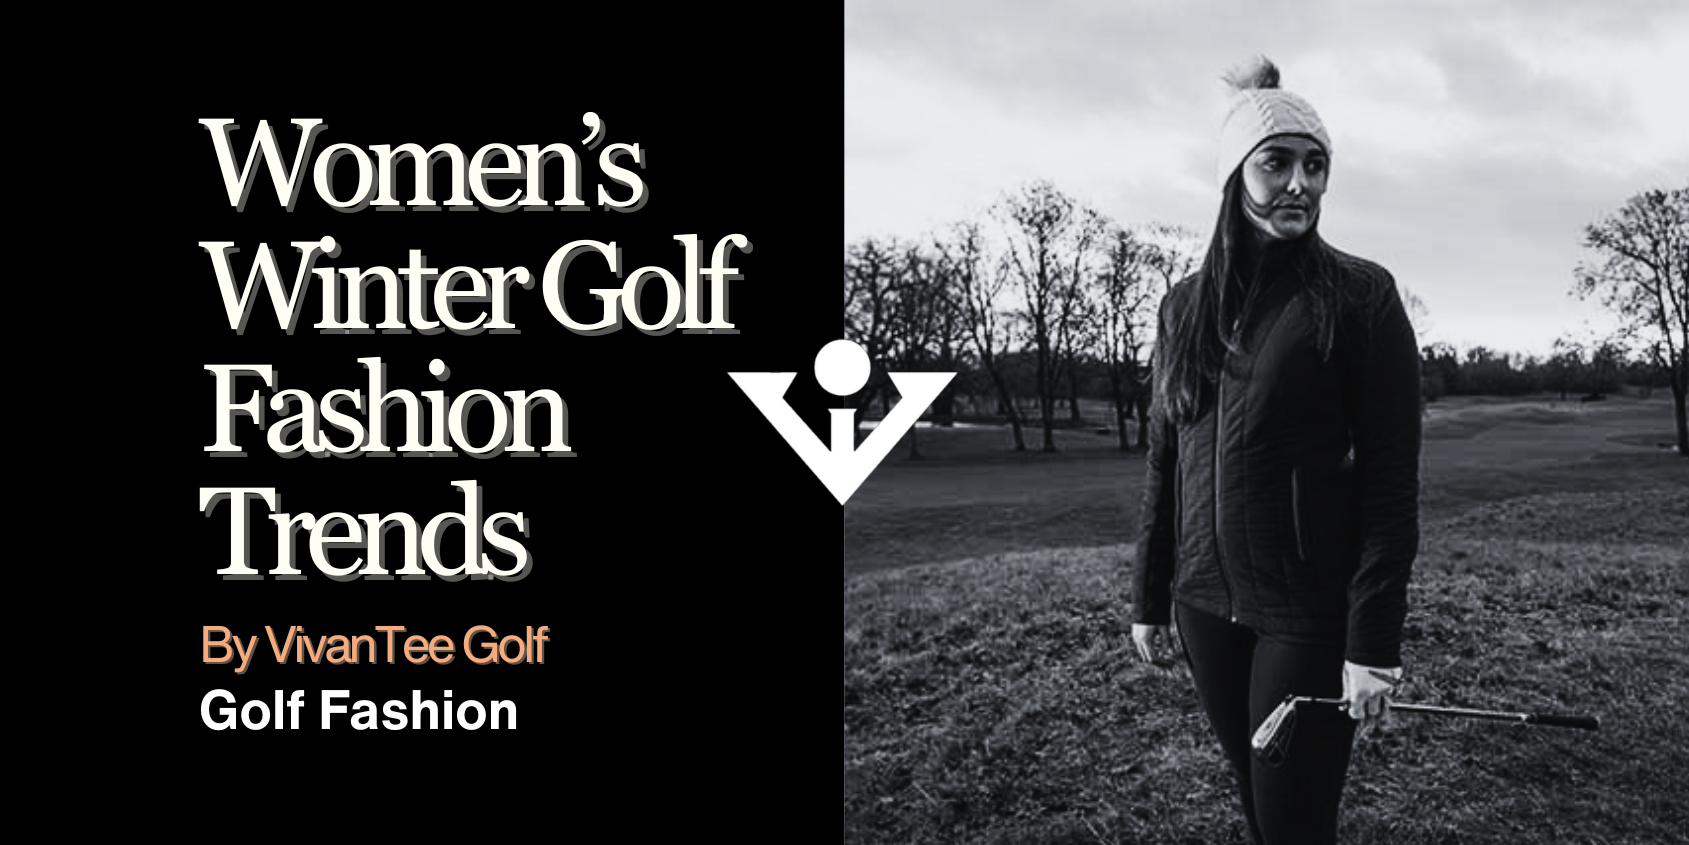 Women's winter golf clothes | women's winter golf fashion trends a guide based on fashion trends for winter in 2023.  